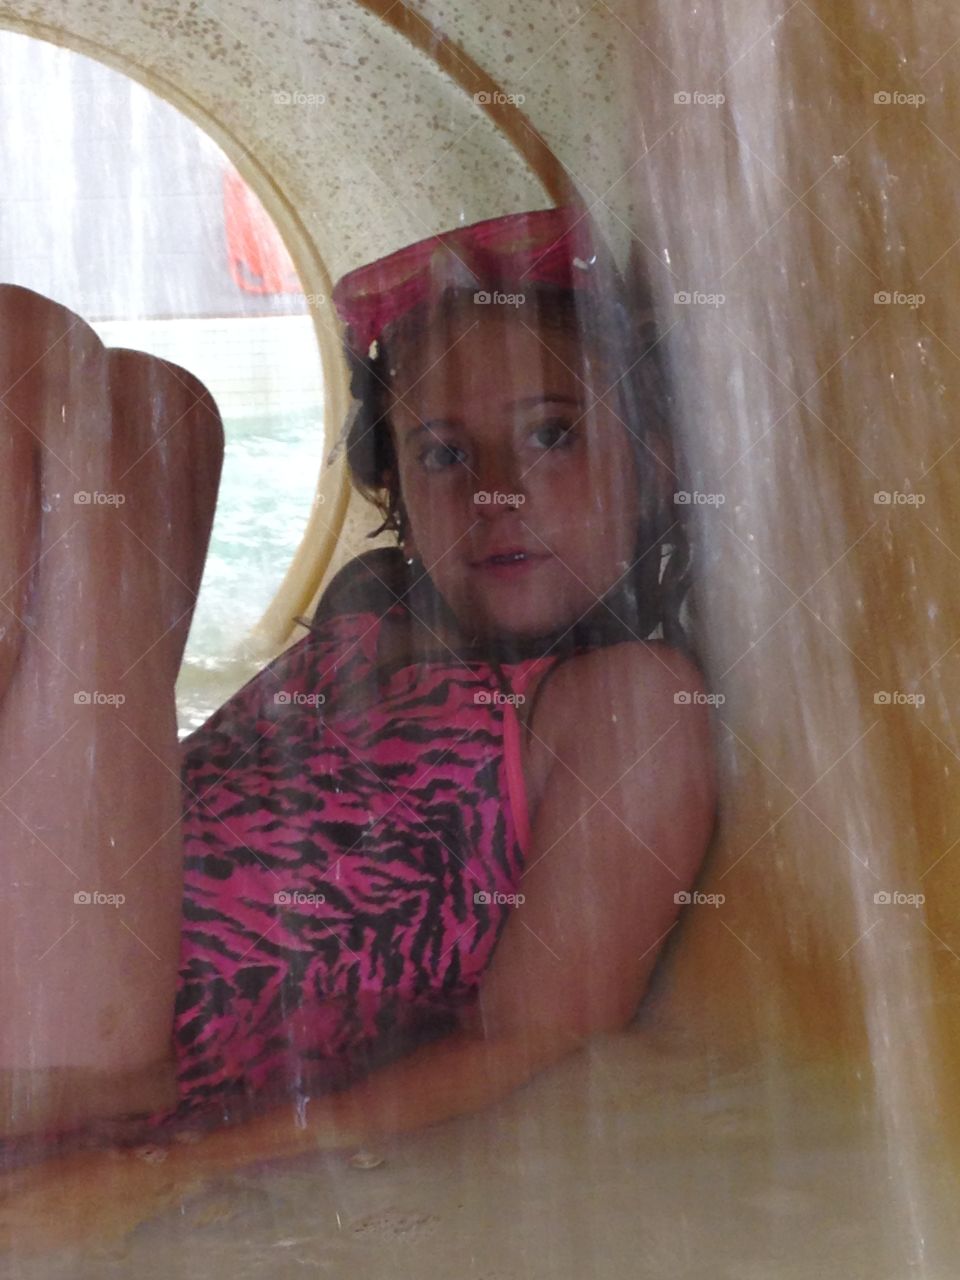 Through the waterfall. View of a girl sitting in a tunnel behind a waterfall at an indoor water park